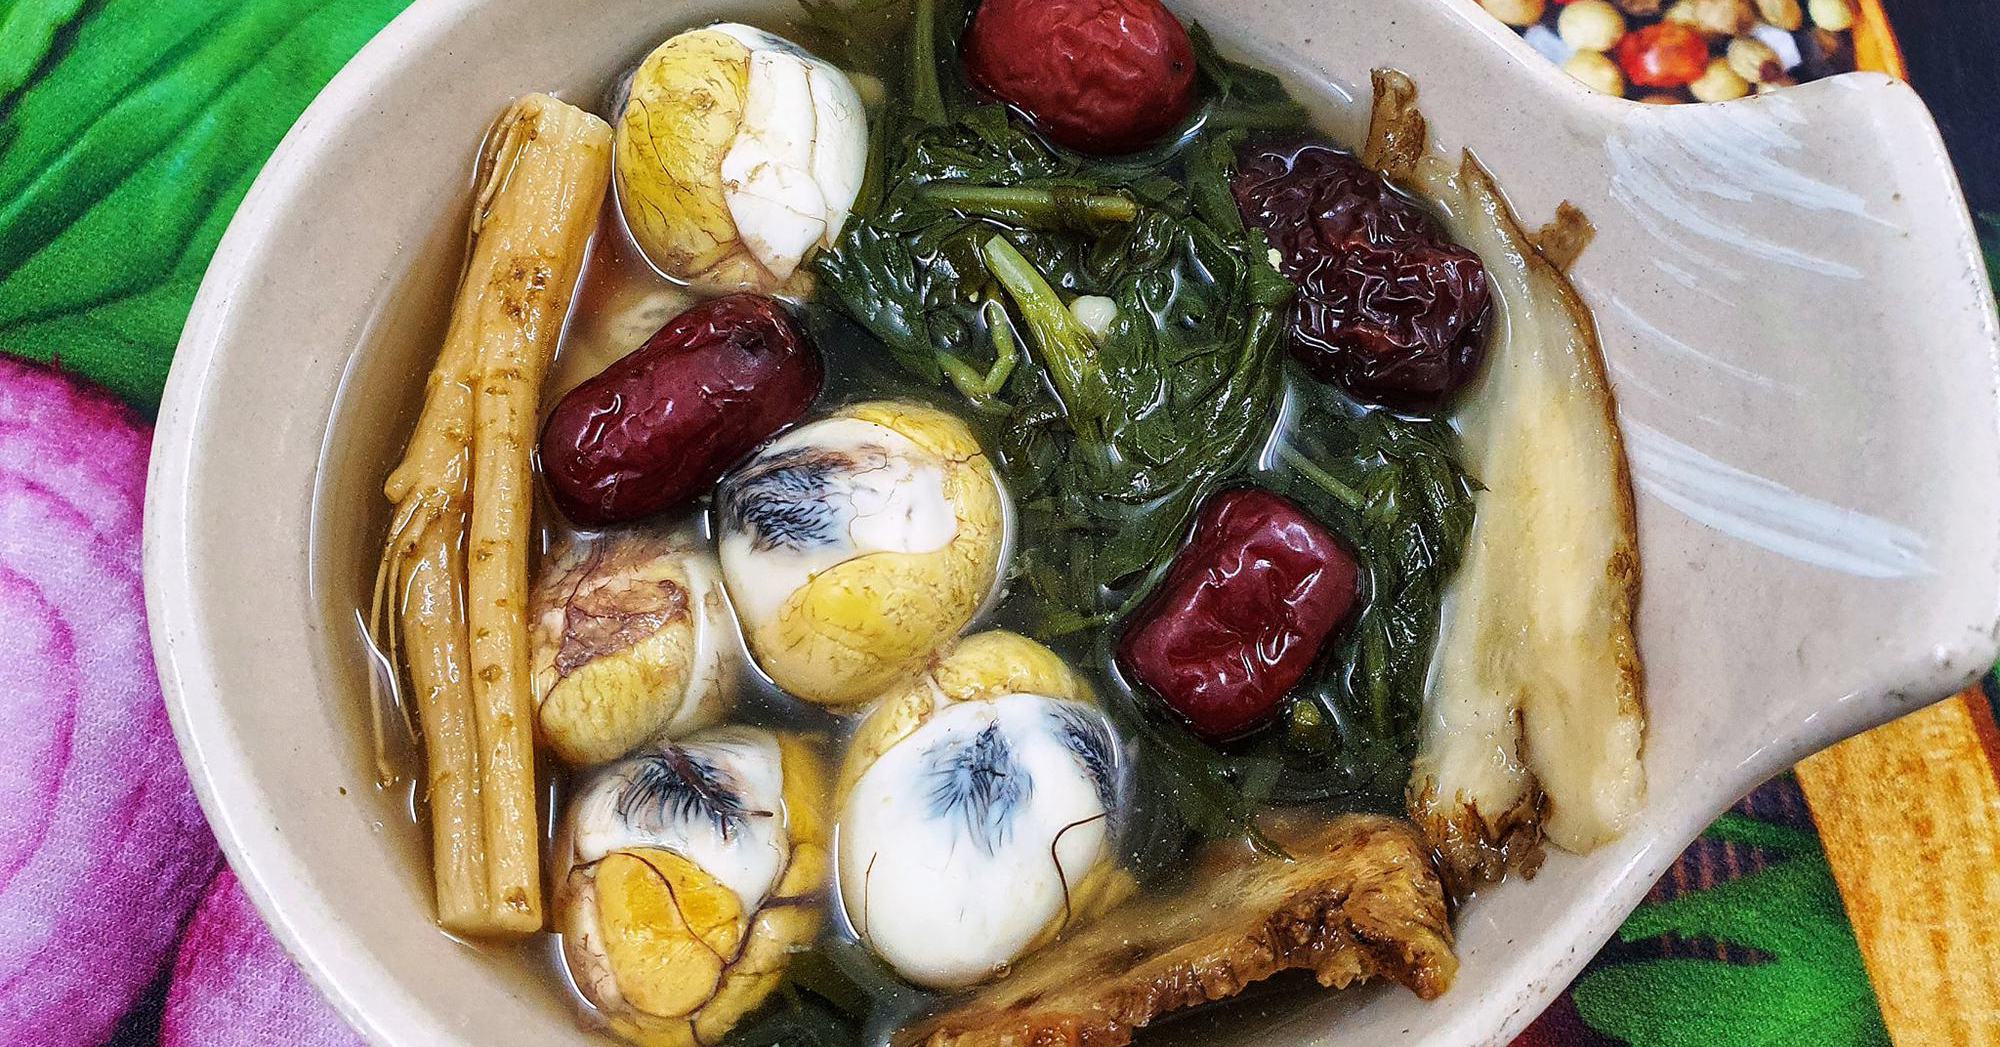 Quail eggs cooked in this way make the dish a tonic